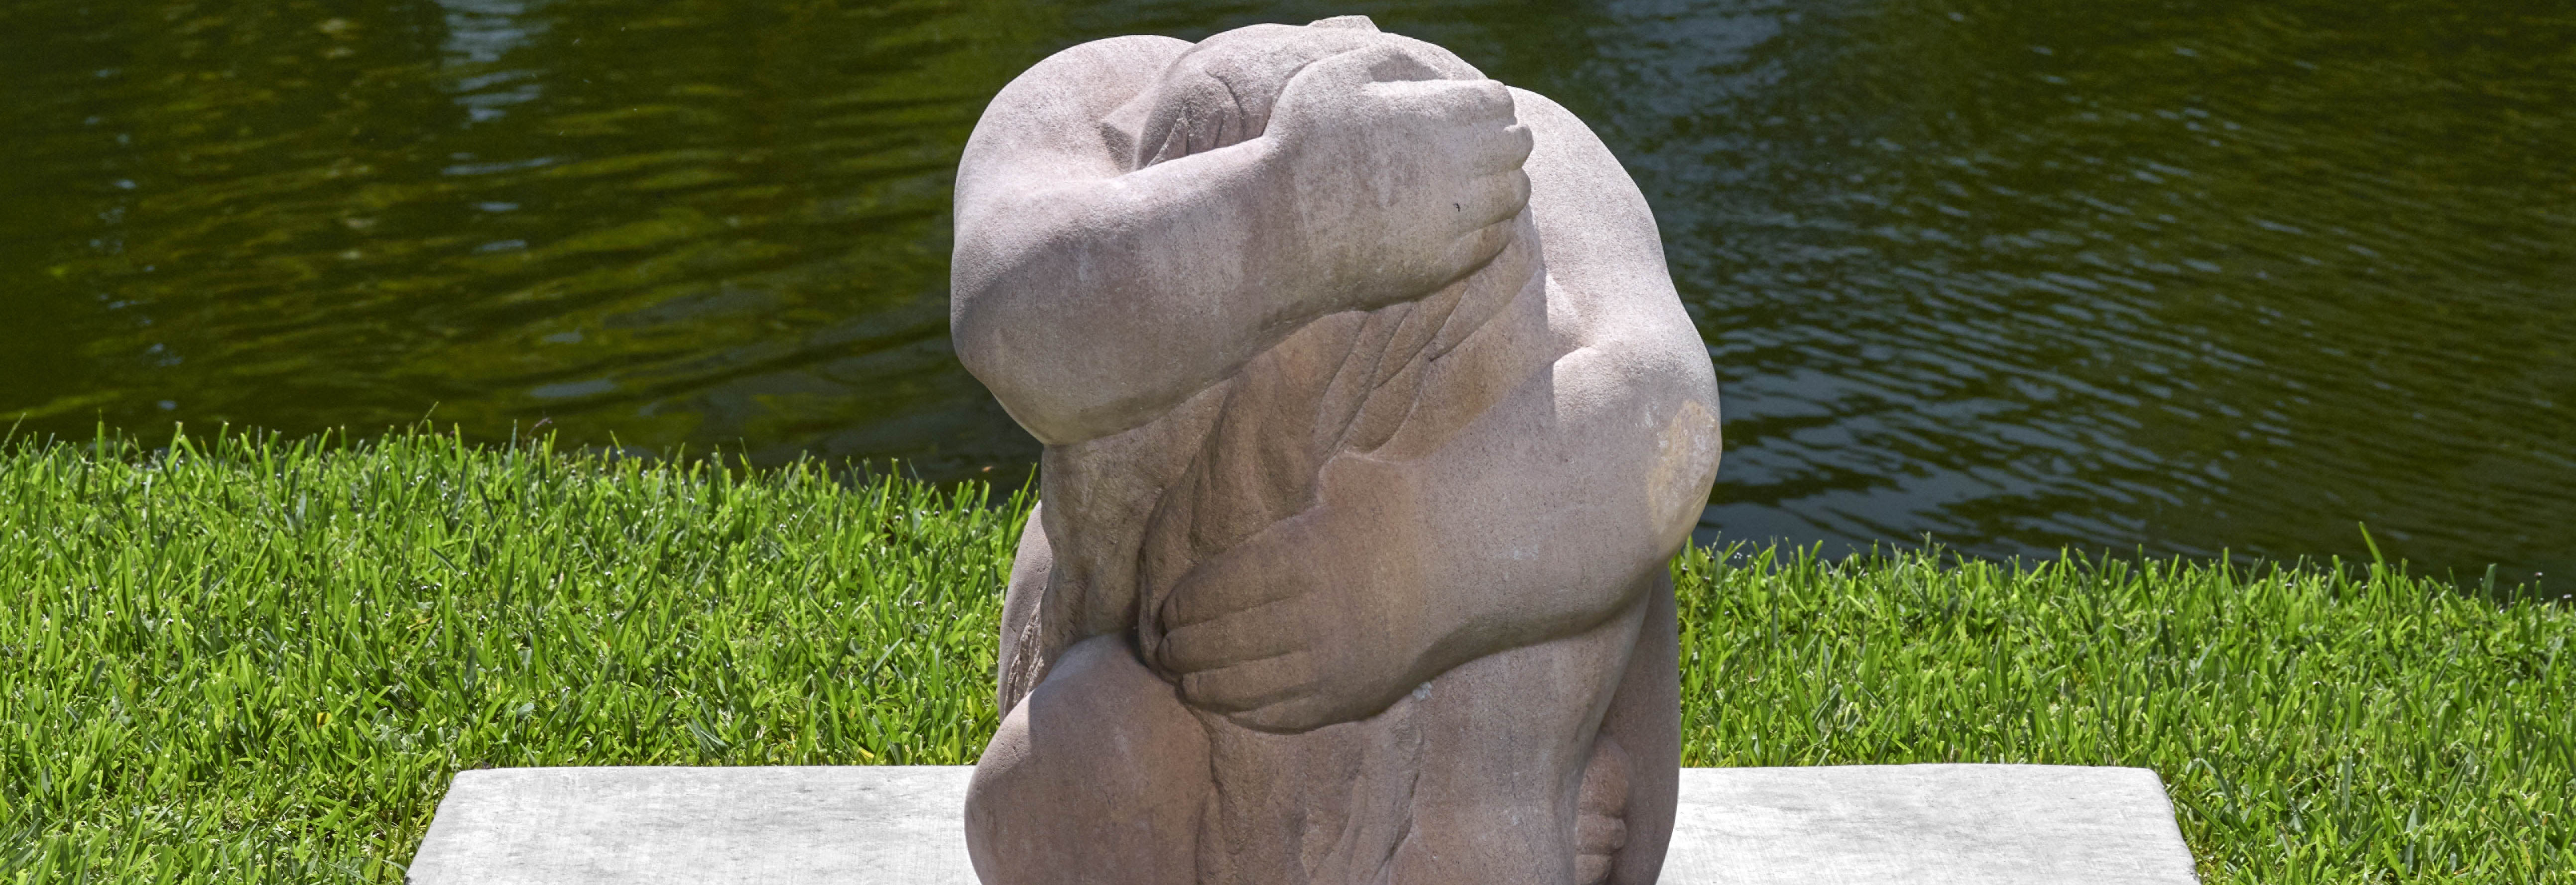 stone outdoor sculpture of a seated figure holding themselves in their arms forming almost a spherical shape with their entire body